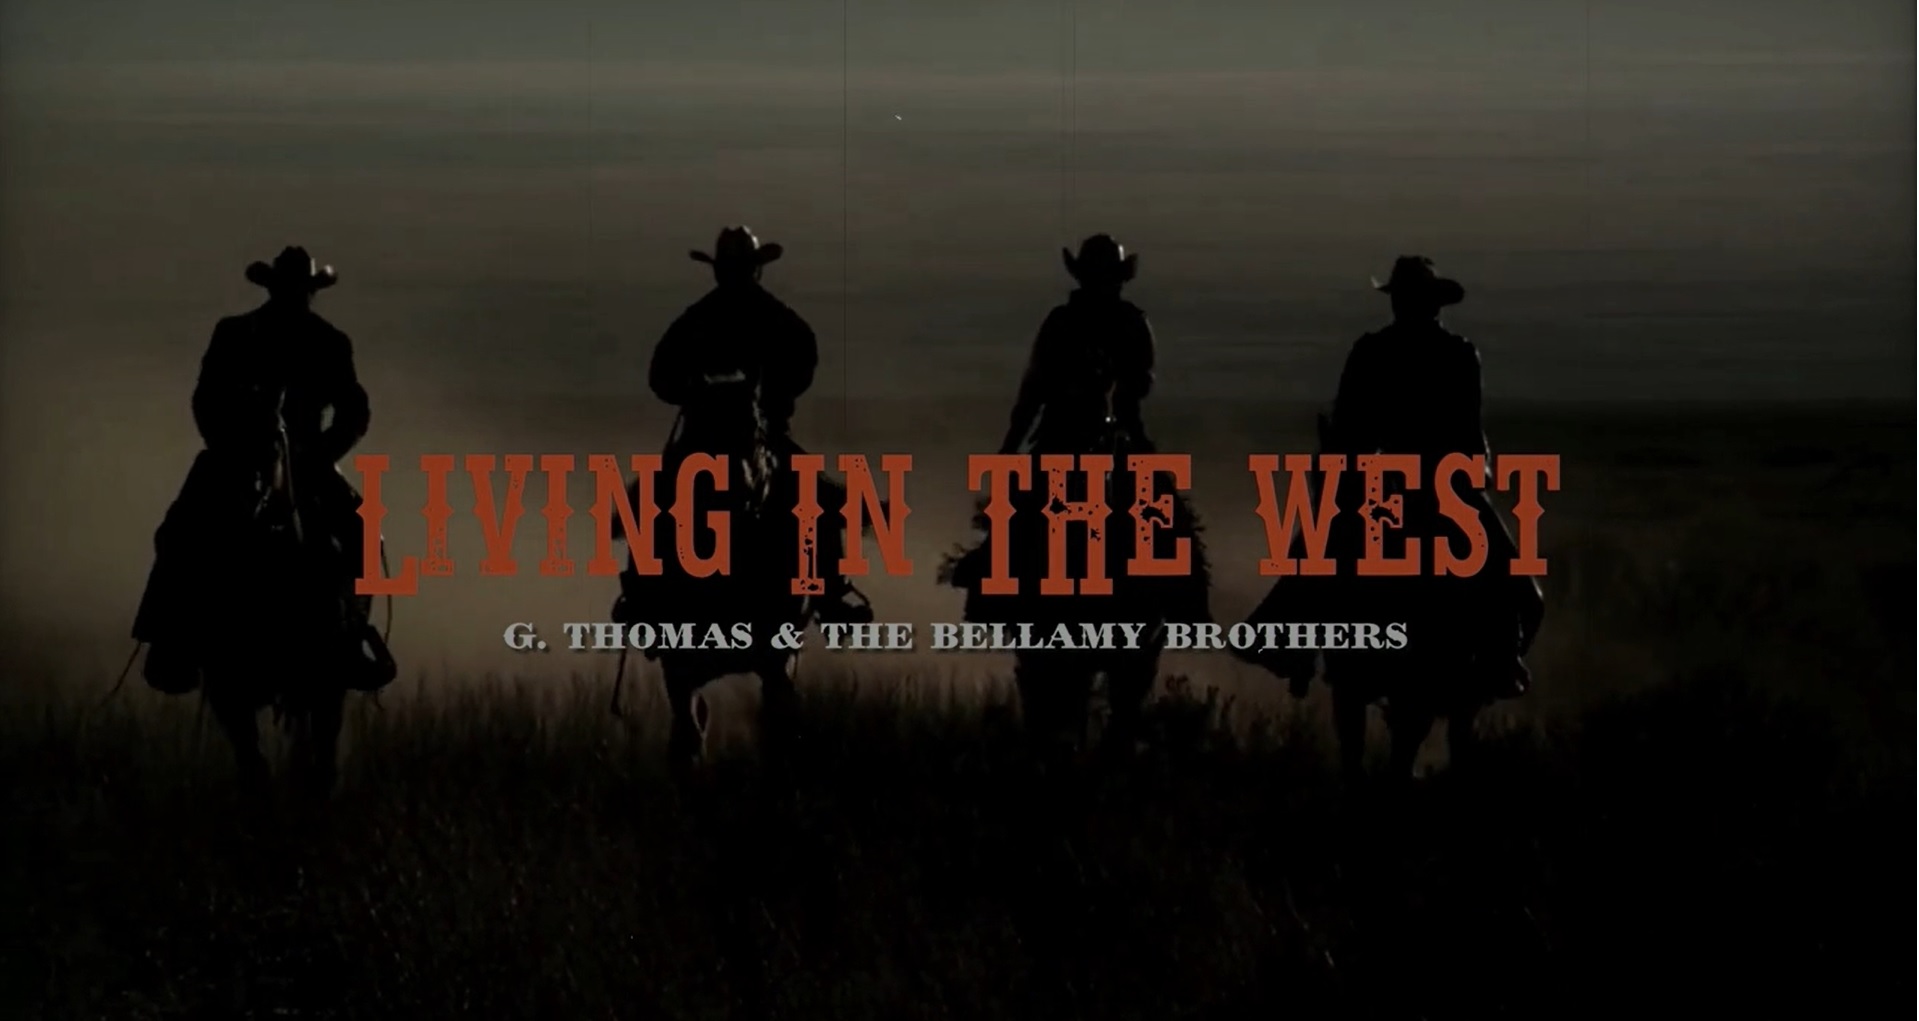 Living In The West / G.Thomas & The Bellamy Brothers